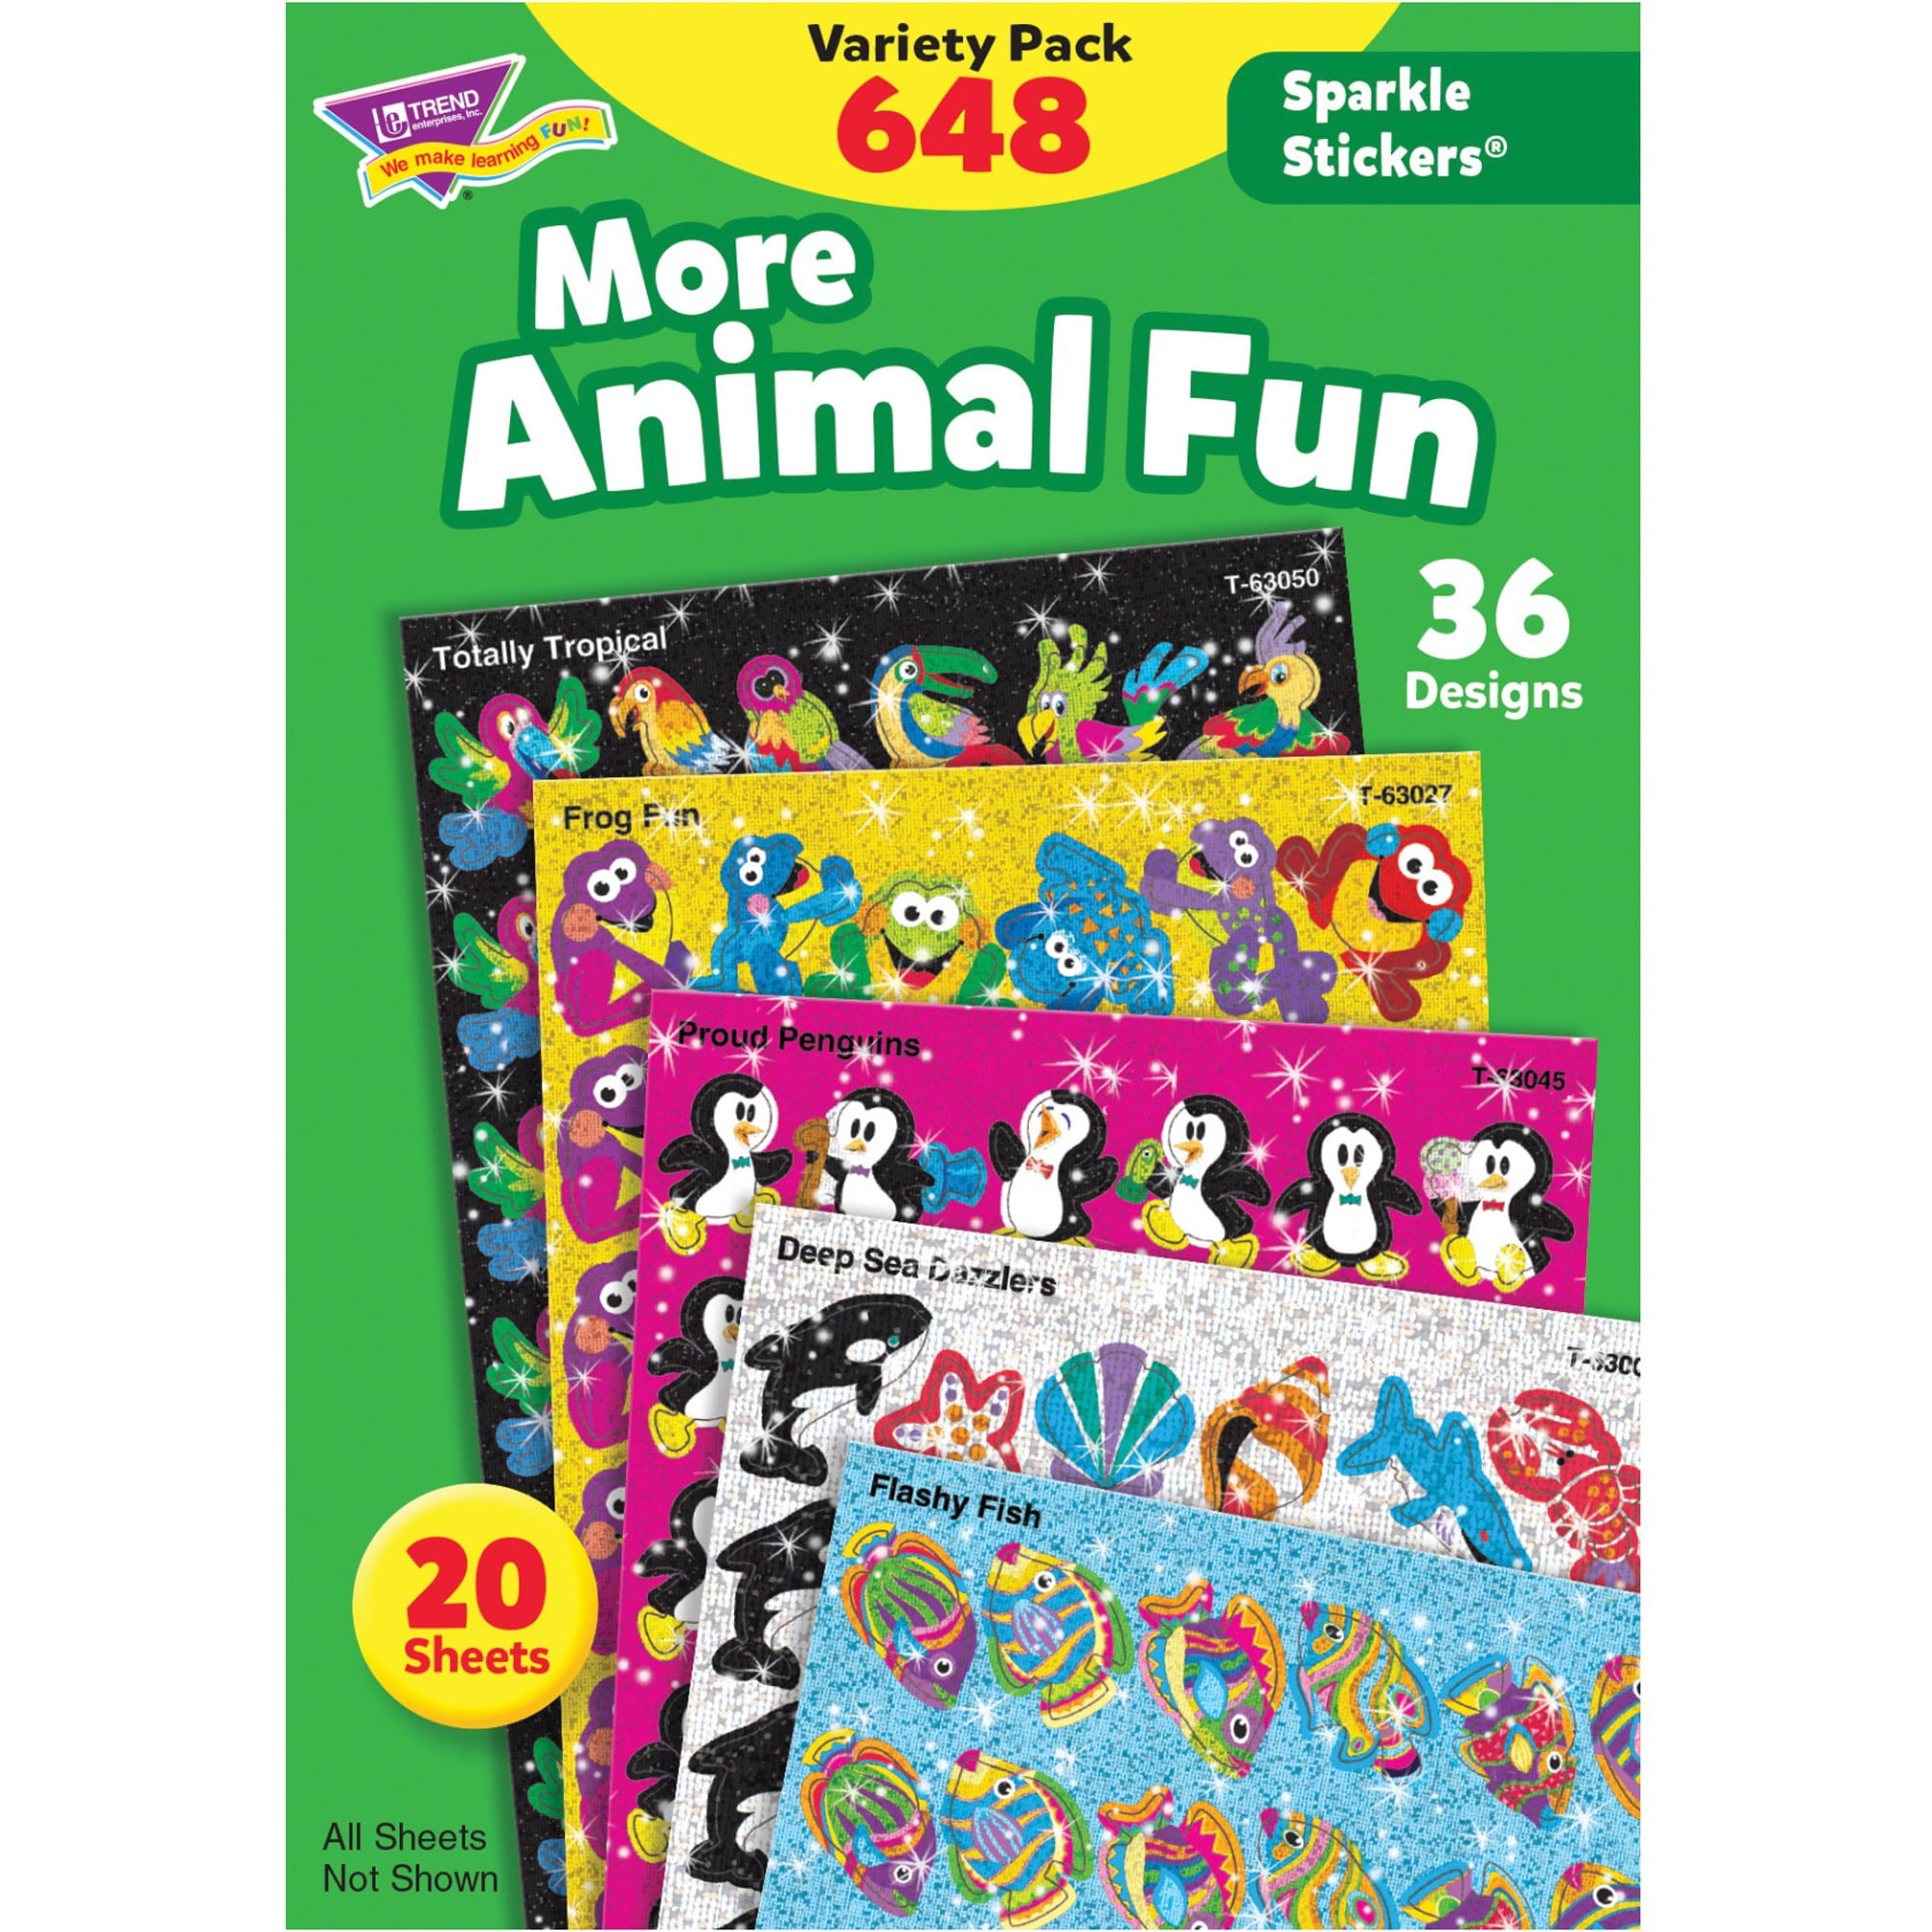 Trend Animal Fun Stickers Variety Pack, Multicolor, 648 / Each ...